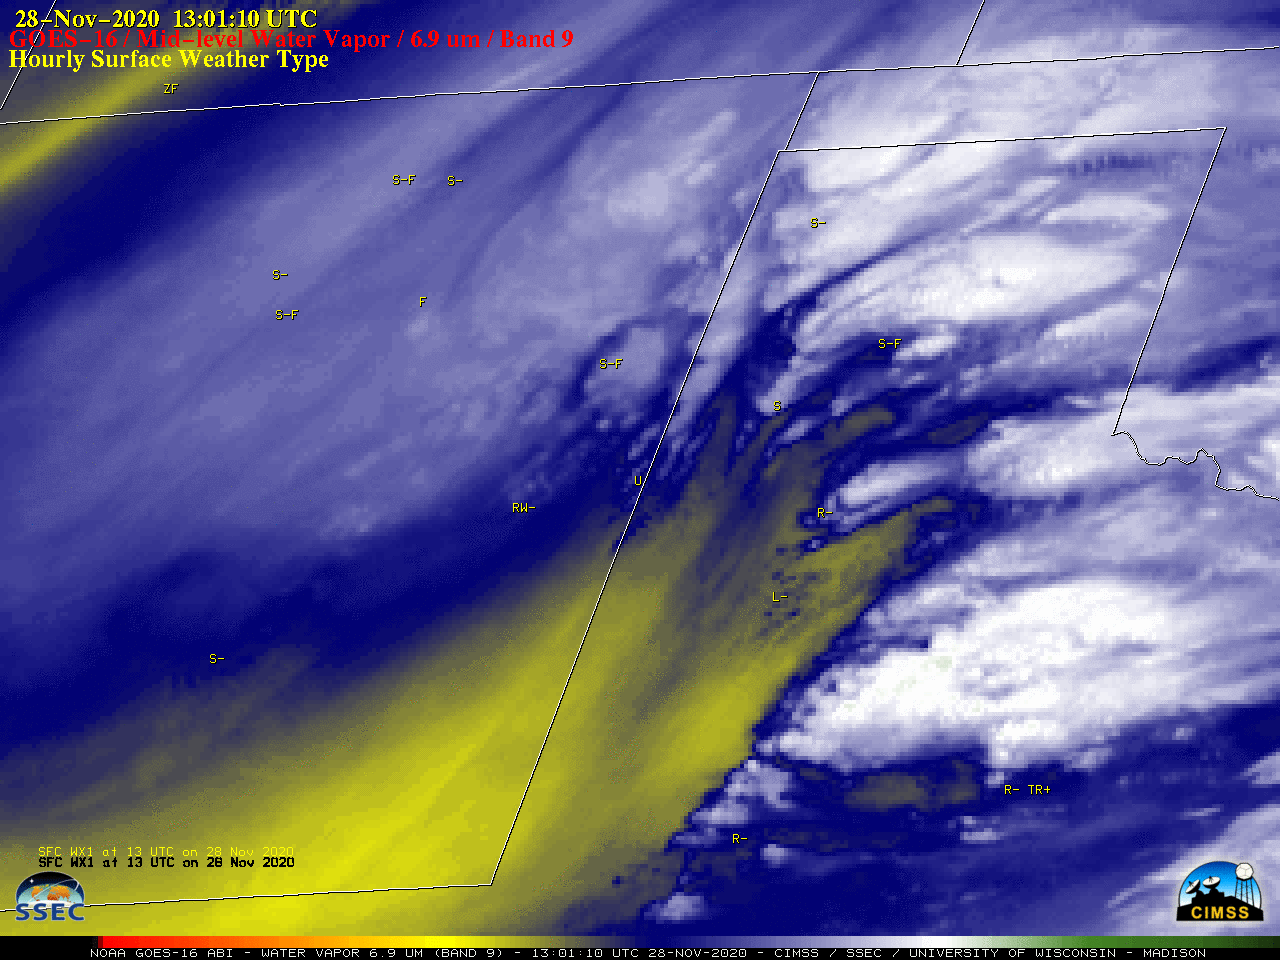 GOES-16 Mid-level Water Vapor (6.9 µm) images, with hourly precipitation type plotted in yellow [click to play animation | MP4]